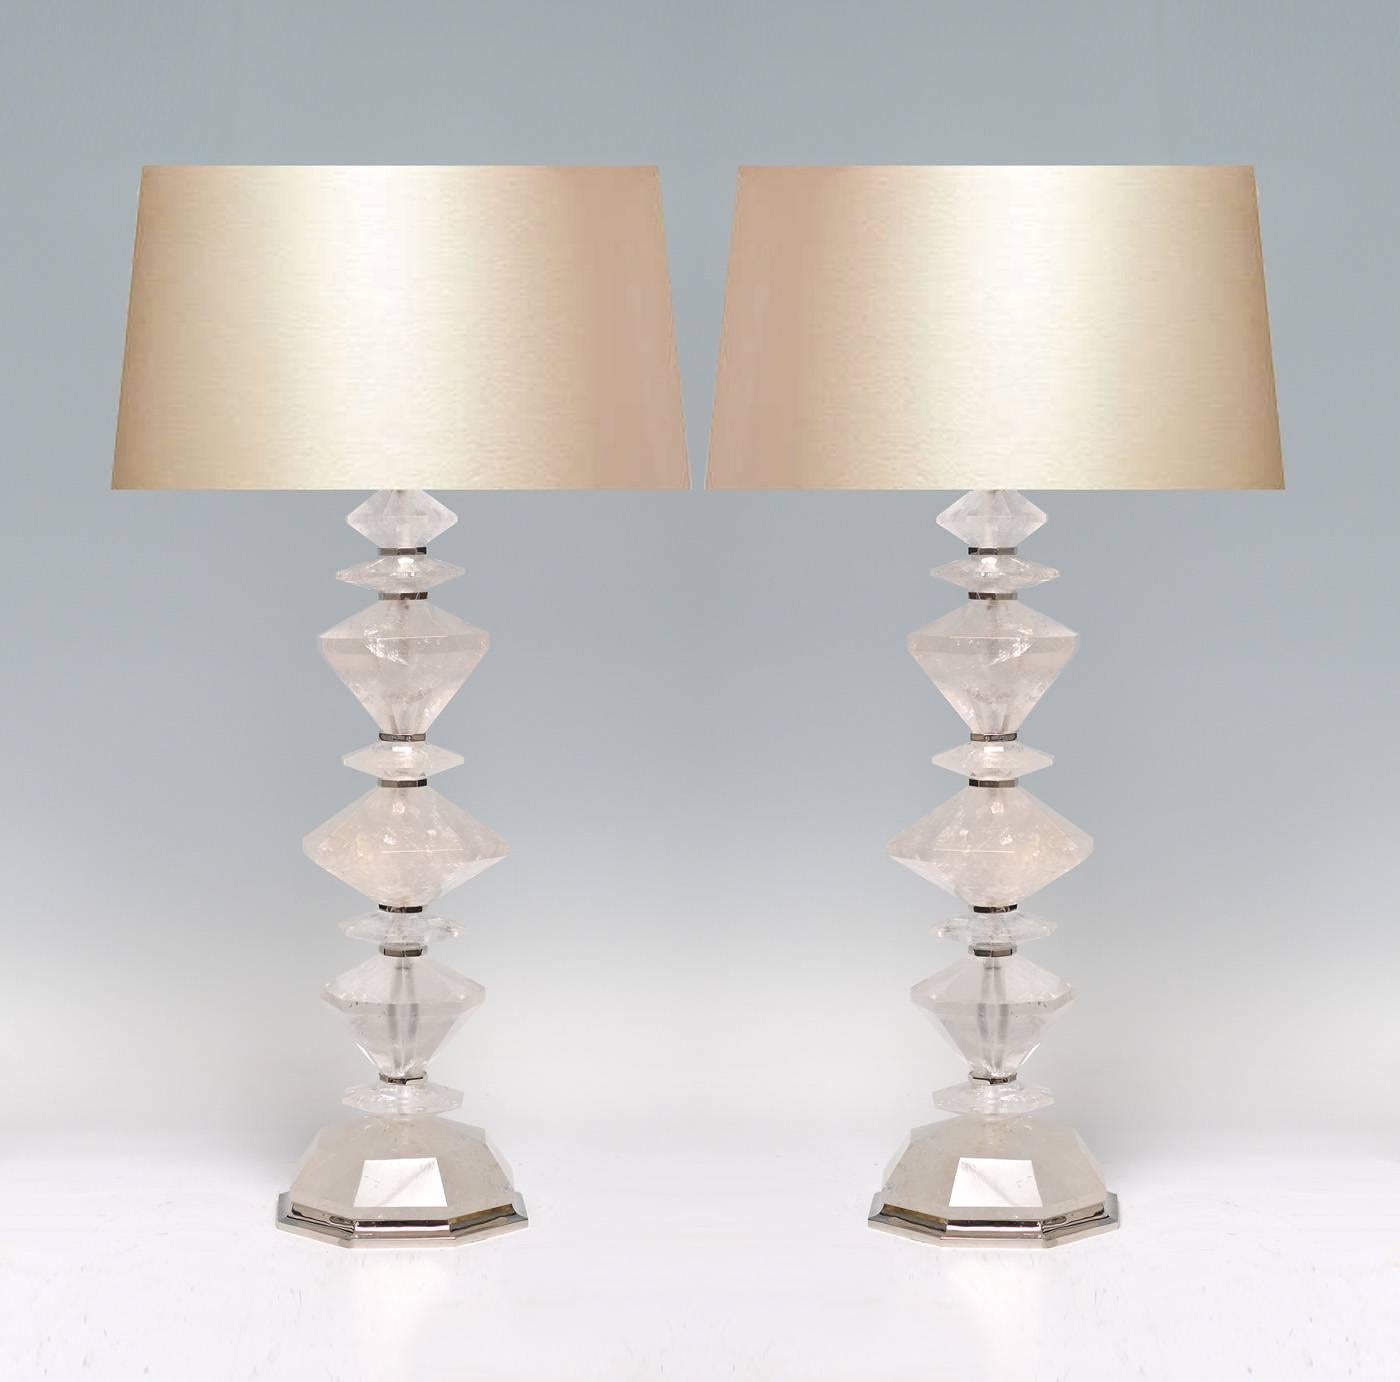 A fine carved diamond form rock crystal lamp quartz lamp with nickel-plating insert and base. Available in polish brass and antique brass finished. 
To the rock crystal: 22